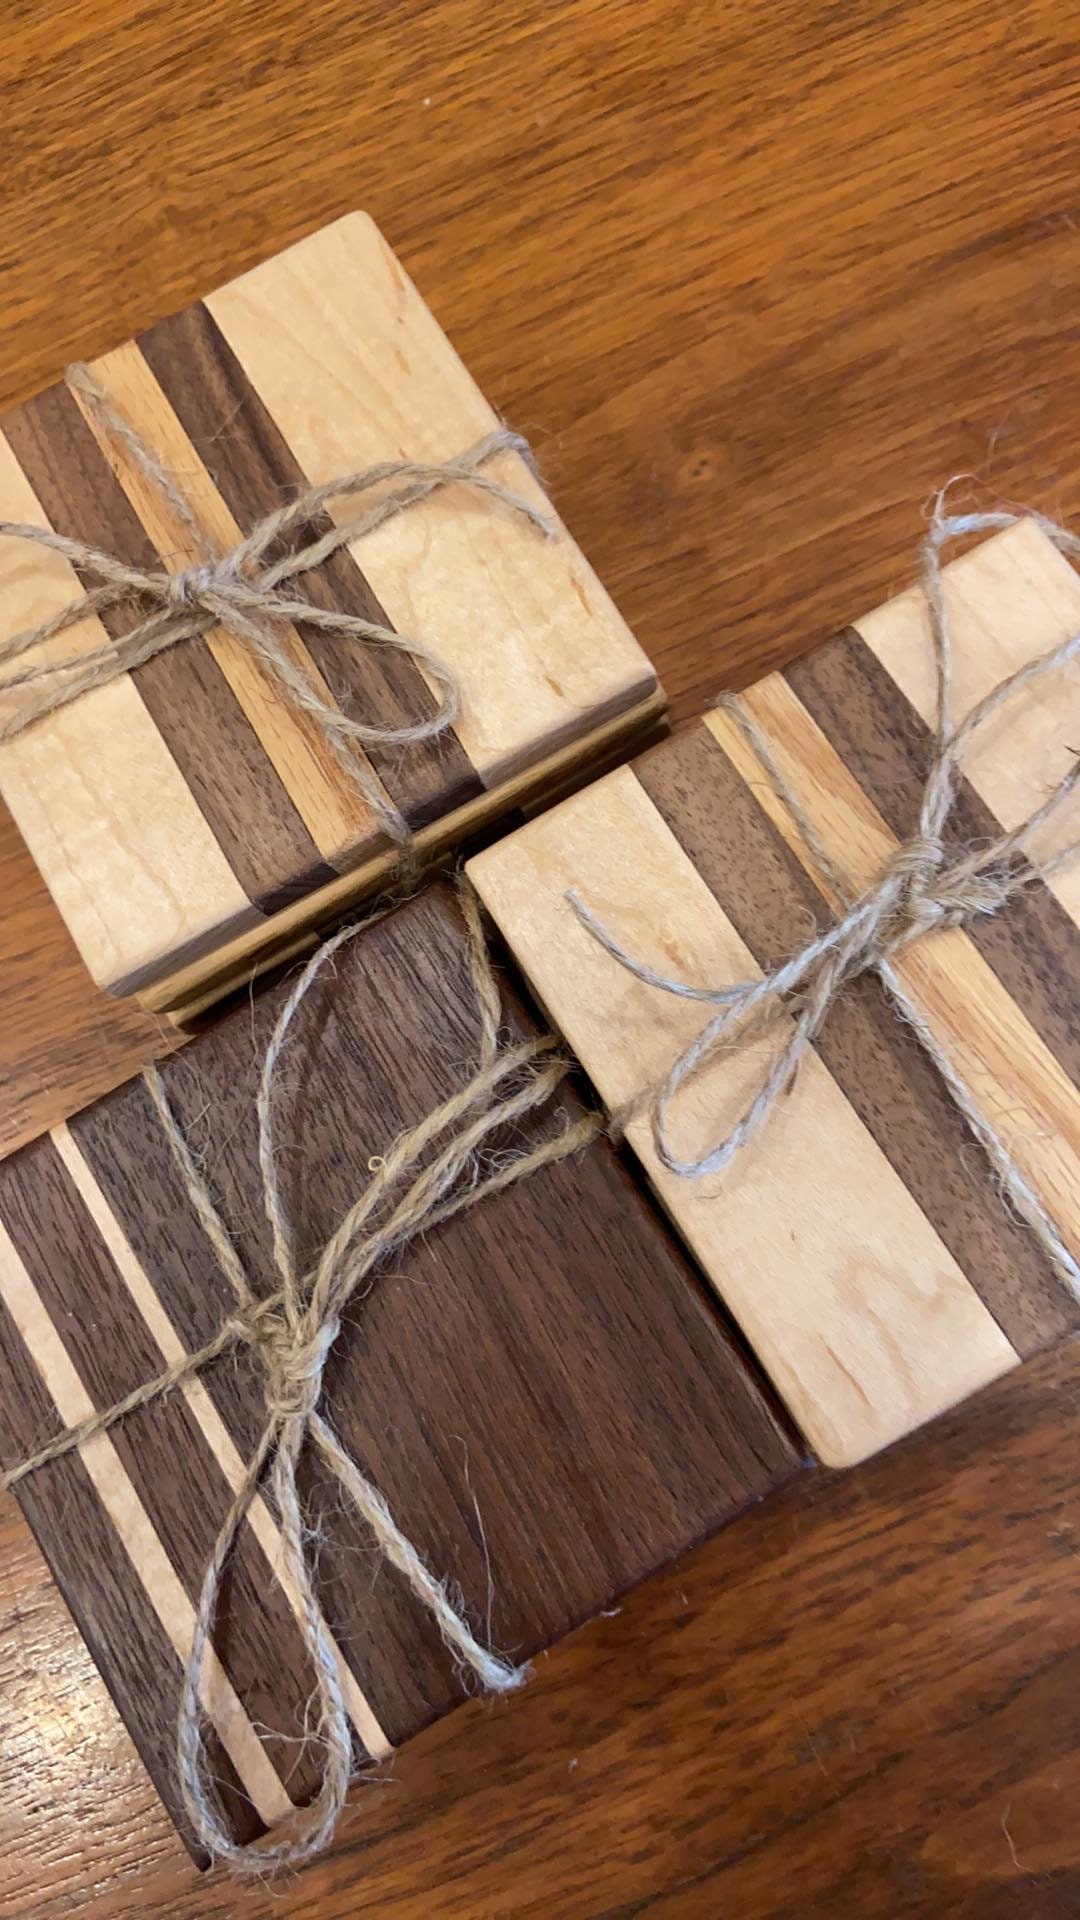 Handcrafted Sets of 4 Wood Inlay Inlaid Wooden Coasters, Local Artisans Ed  Hoffeditz and Gerald Lehman 